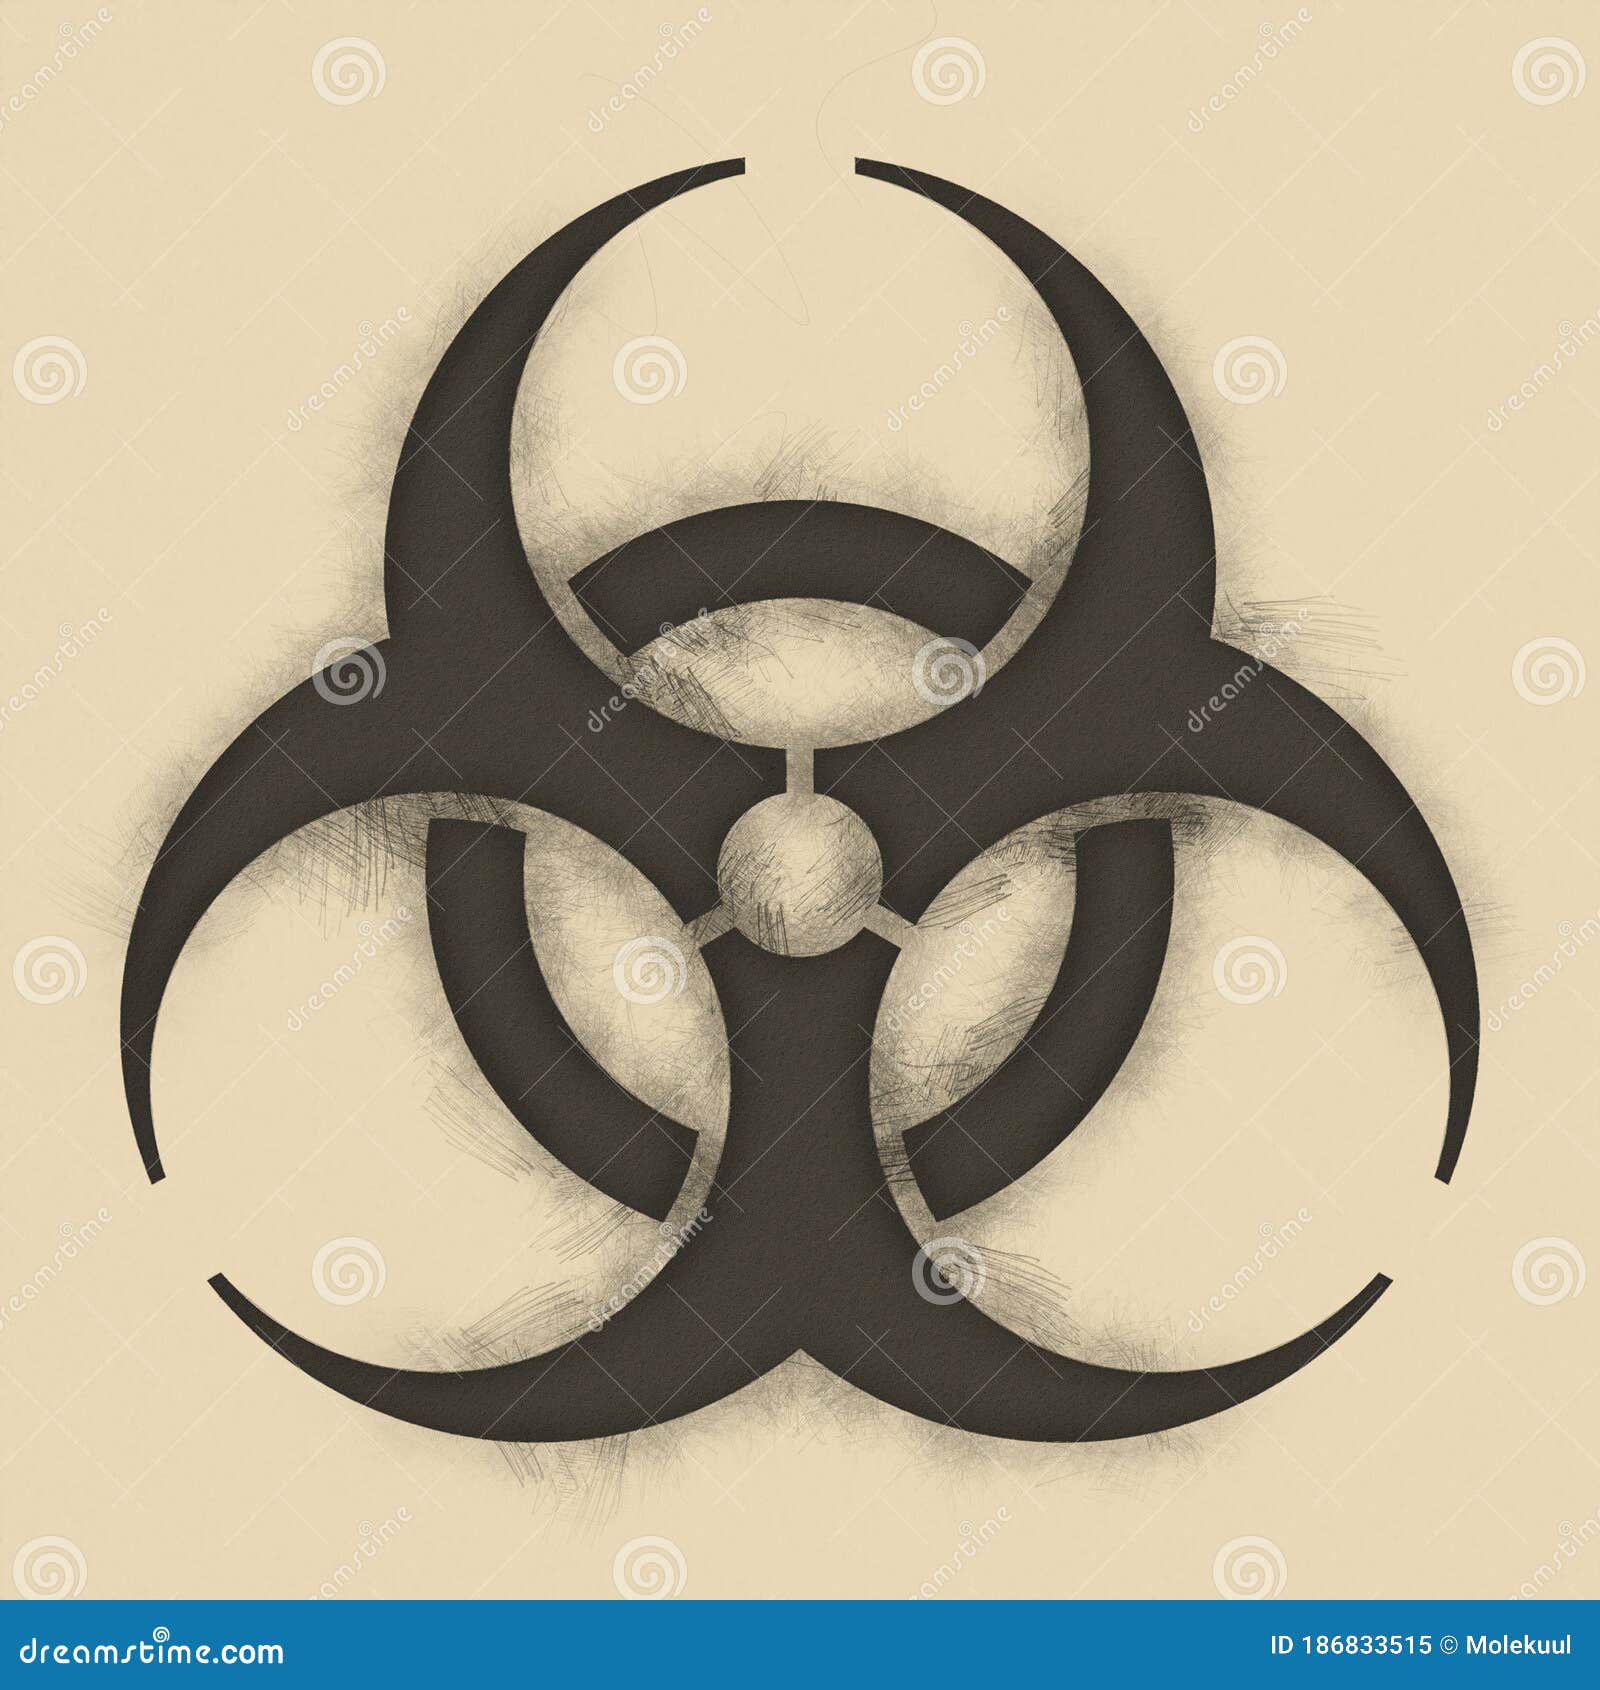 101 Best Biohazard Tattoo Ideas You'll Have to See to Believe!